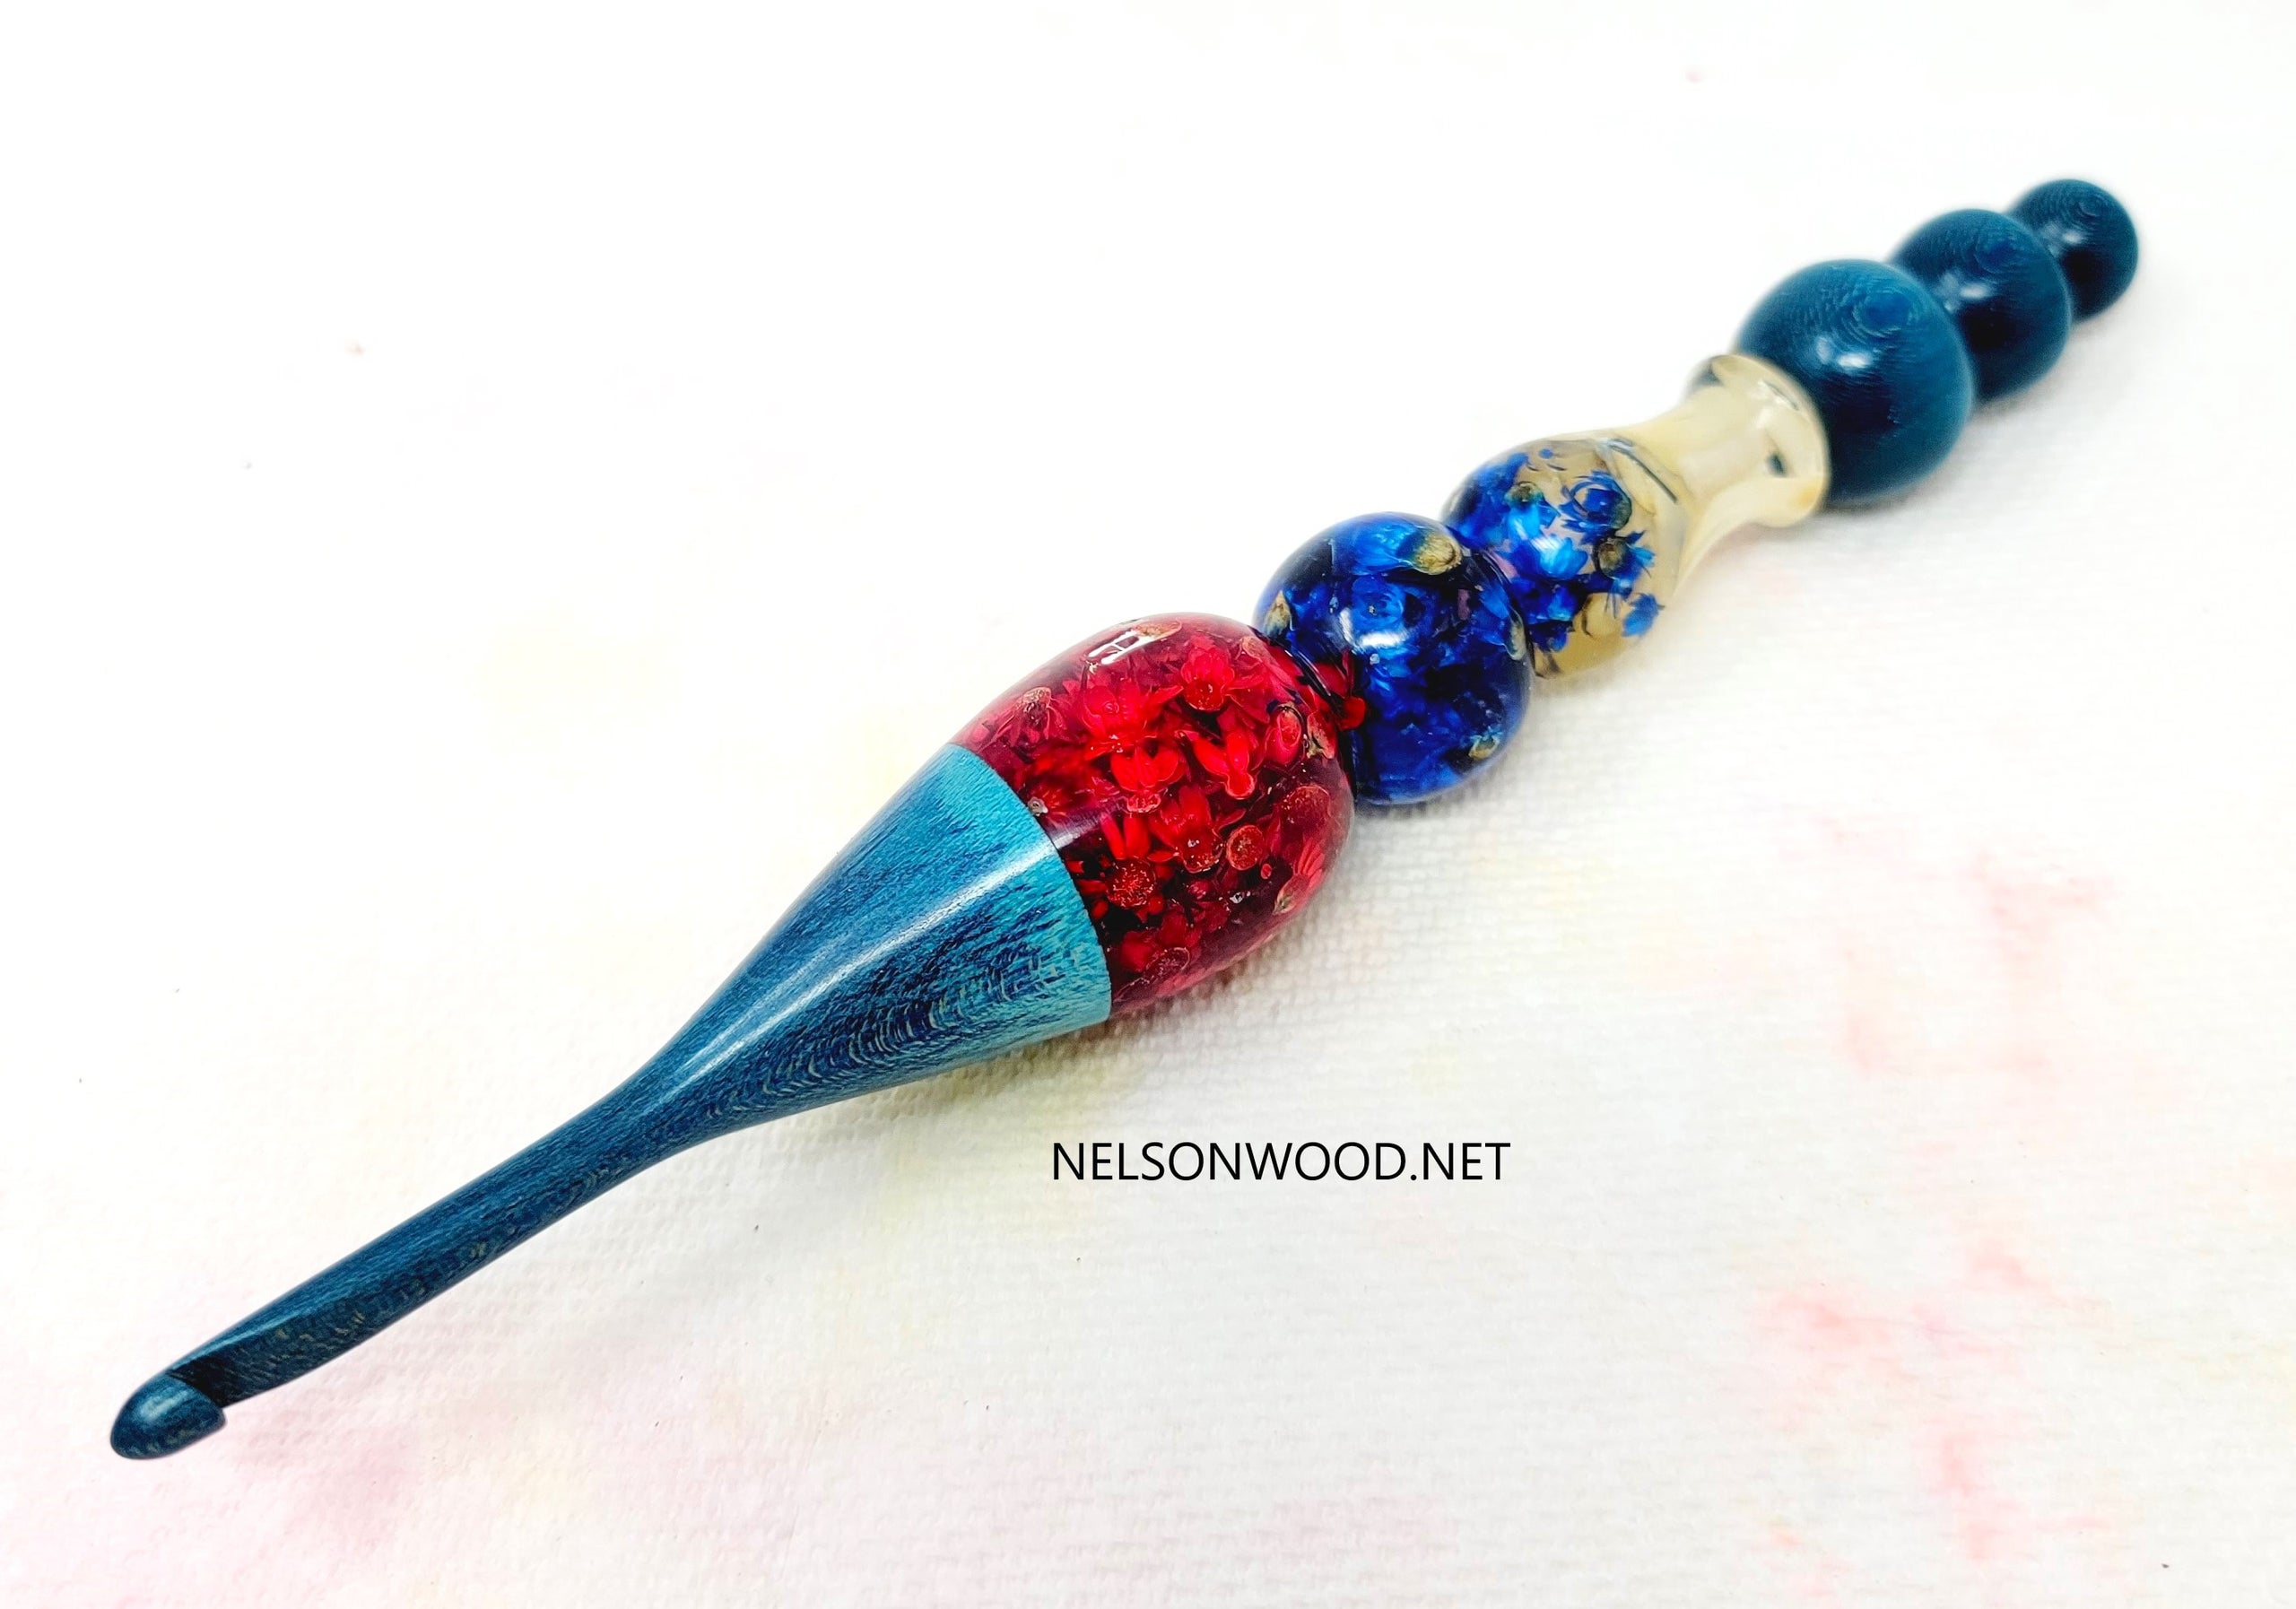 Crochet Hook Red, White and Blue, Handcrafted NELSONWOOD